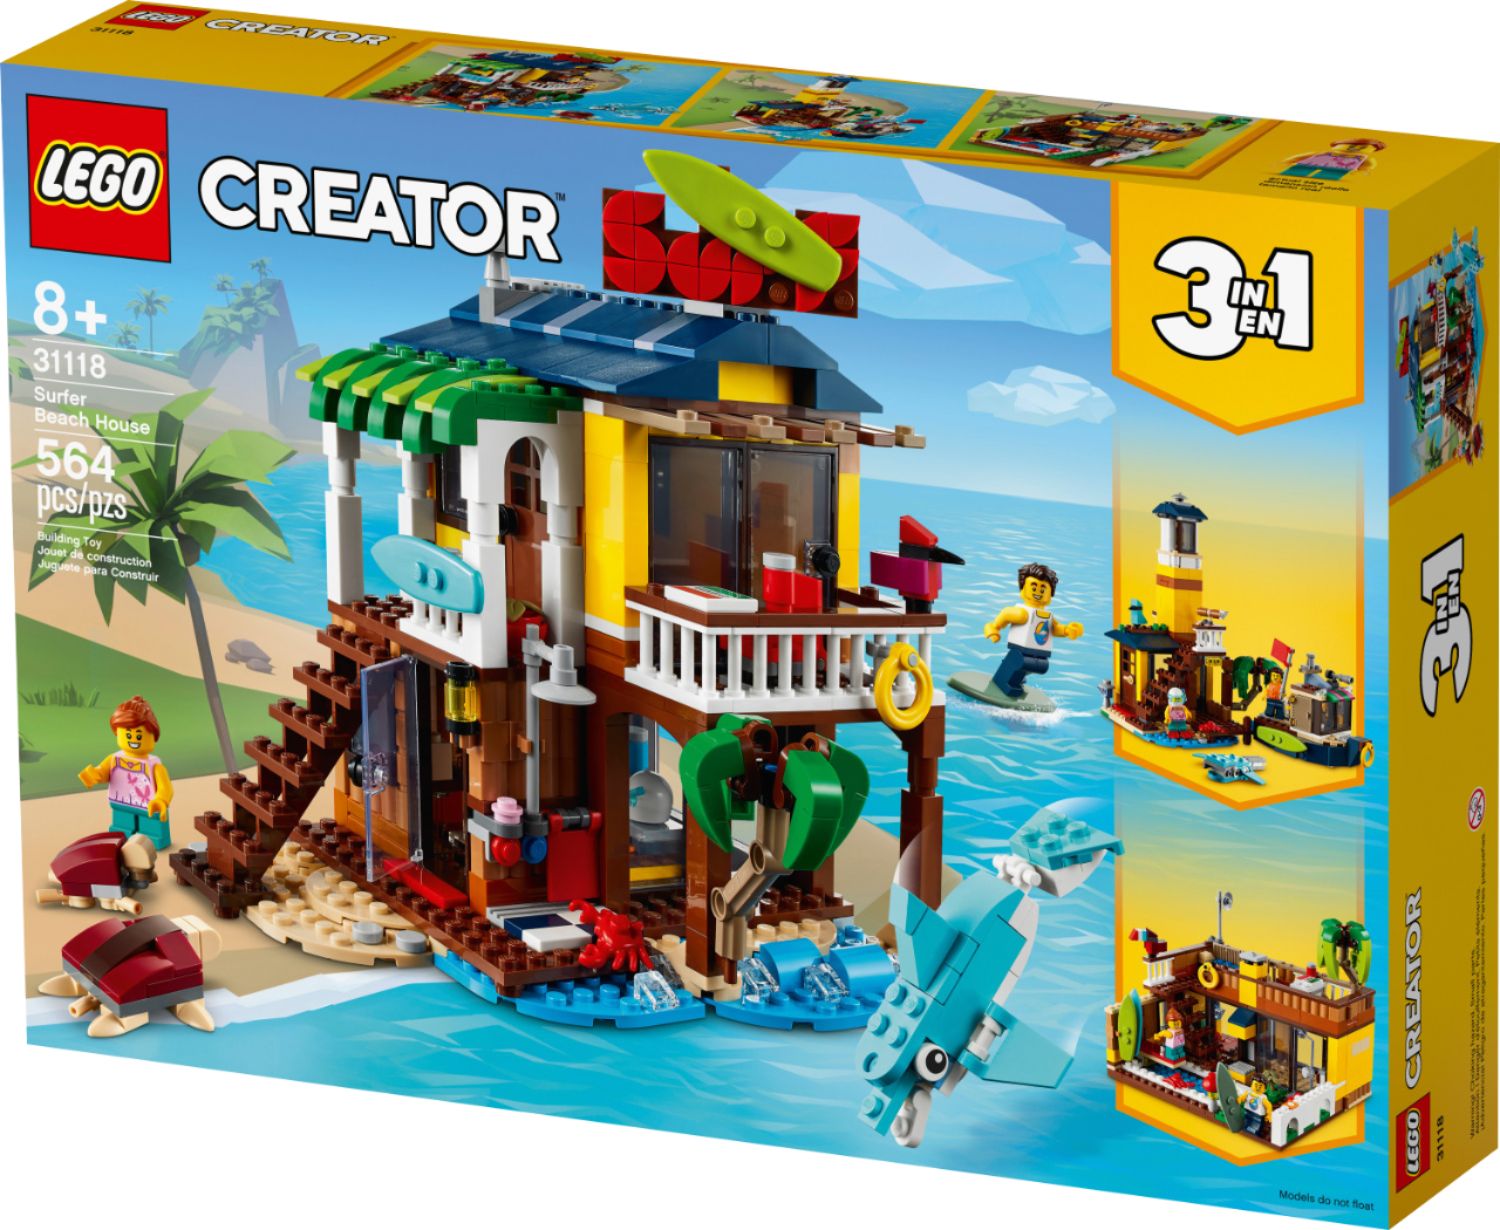 LEGO Creator 3 in 1 Beach Camper Van Building Kit, Transforms from a  Campervan to Ice Cream Shop to Beach House, Great Gift for Surfer Boys and  Girls